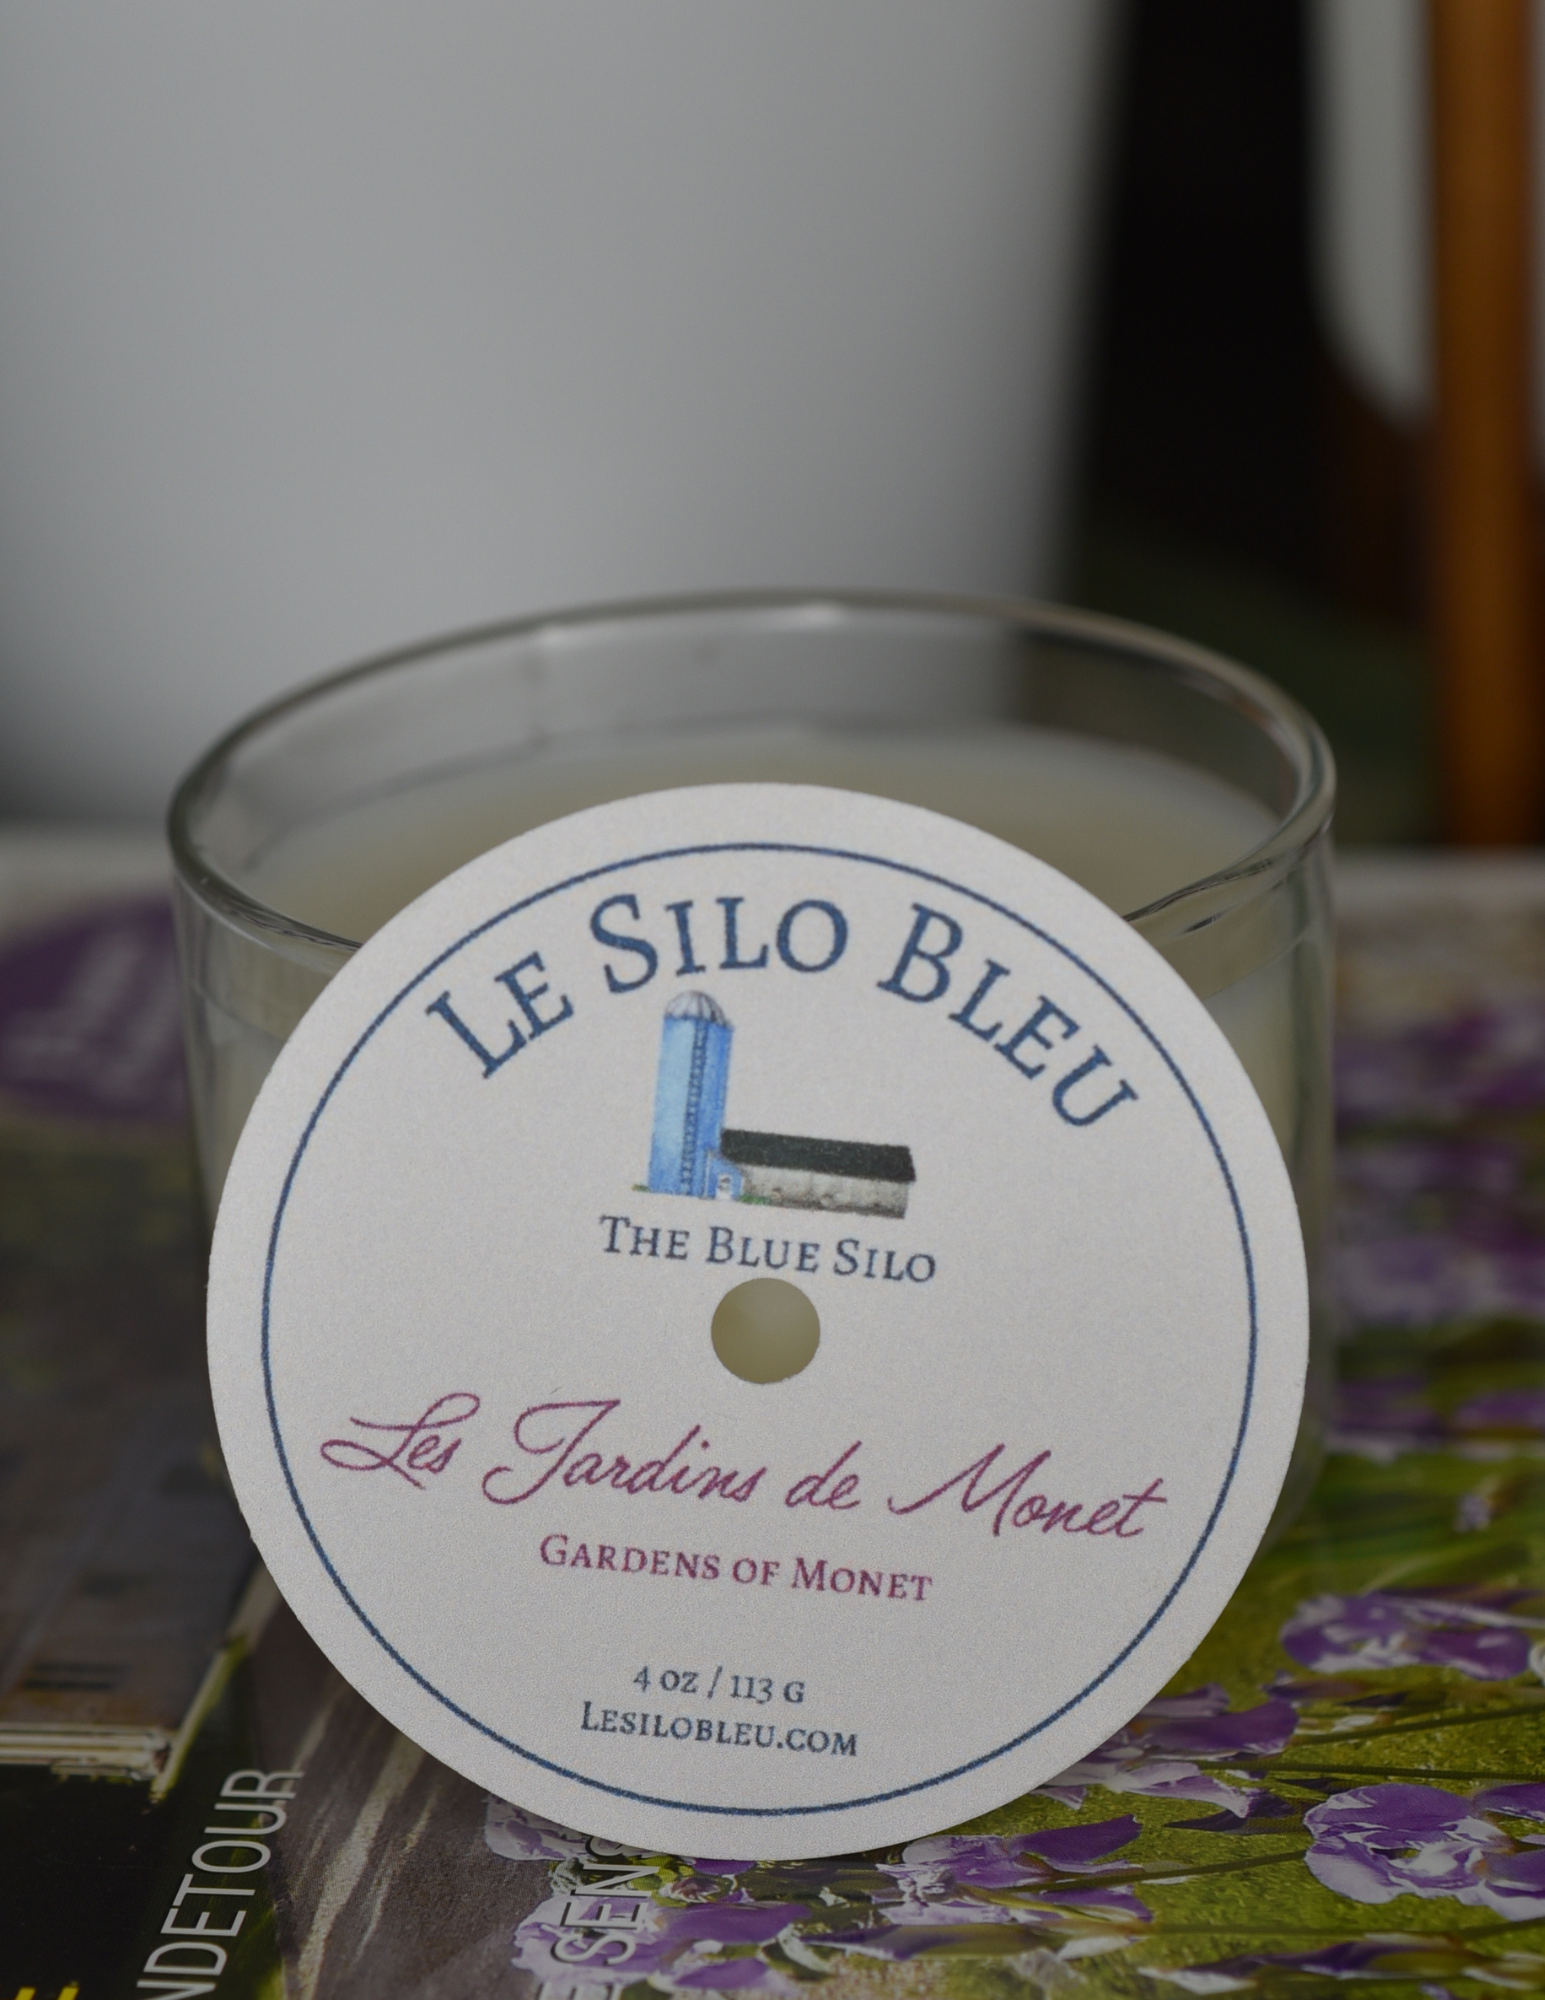 Les Jardins de Monet, a floral  scented candle is sitting on top of a French magazine with a plant in a white pot in the background.